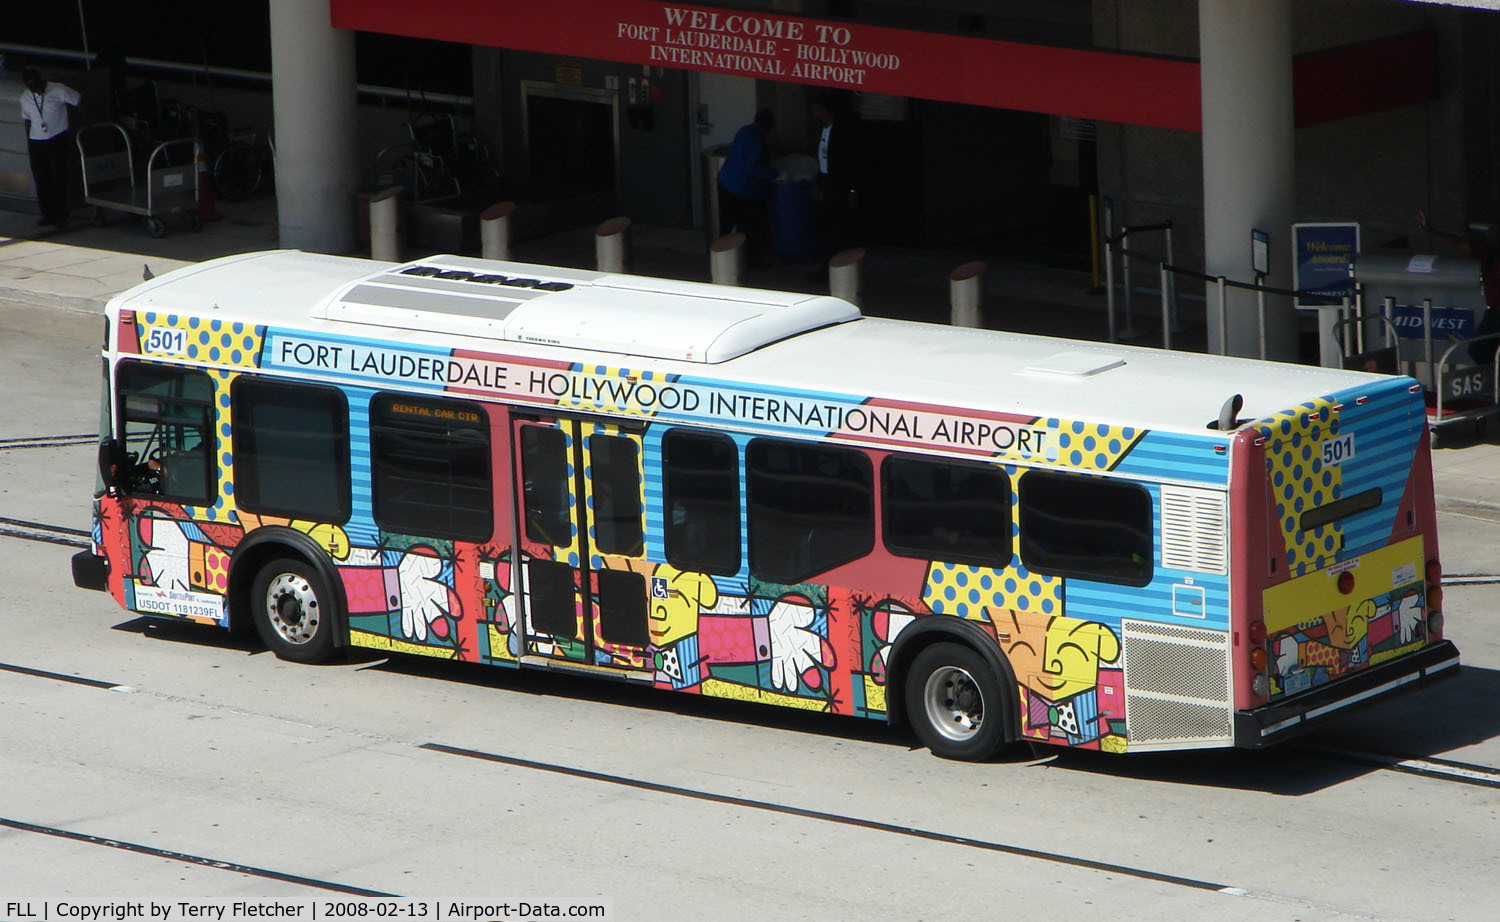 Fort Lauderdale/hollywood International Airport (FLL) - The dedicated Bus transport at Ft Lauderdale Int